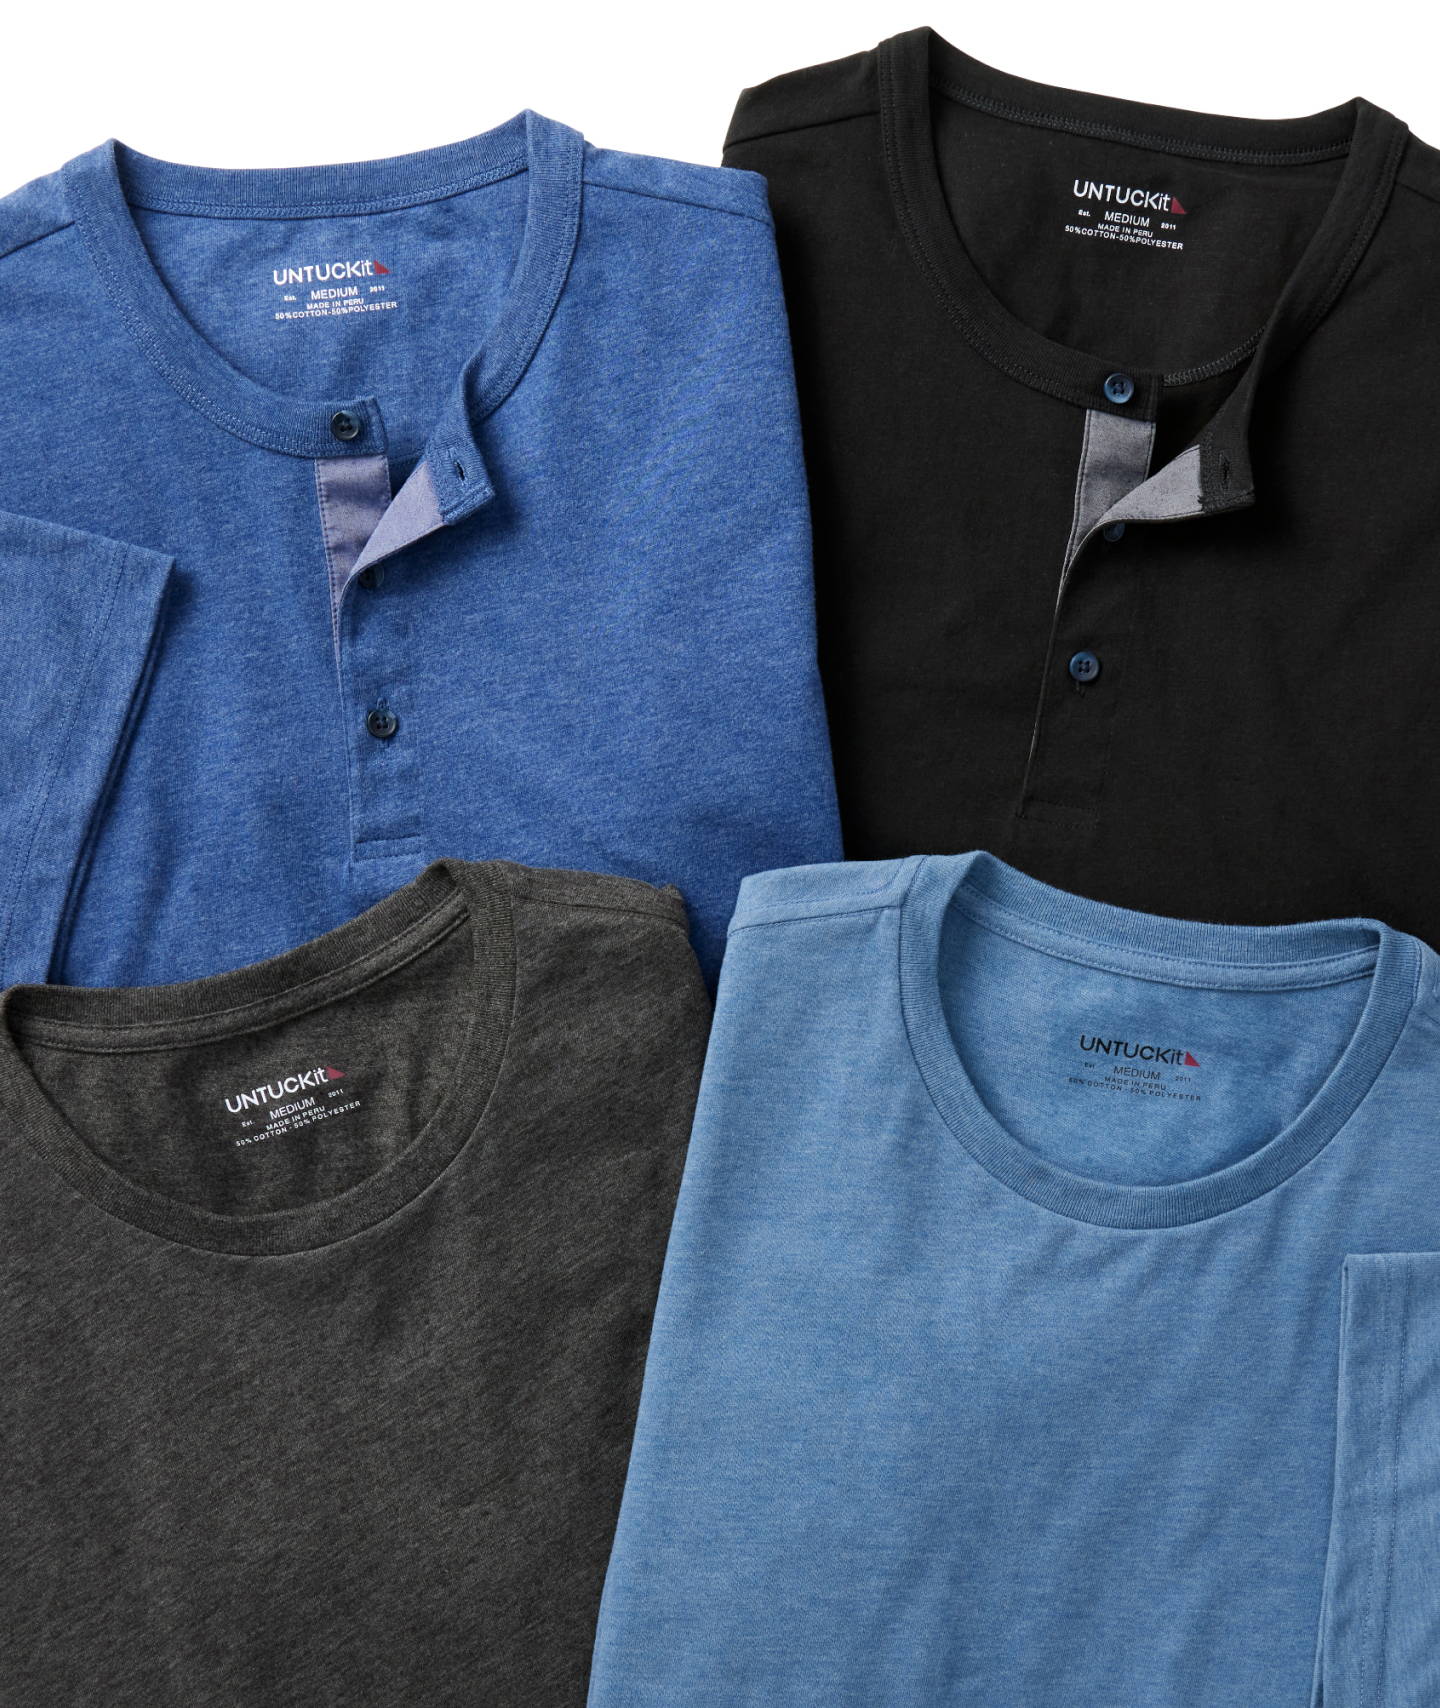 Collection of UNTUCKit ecosoft Henleys in various colors. 